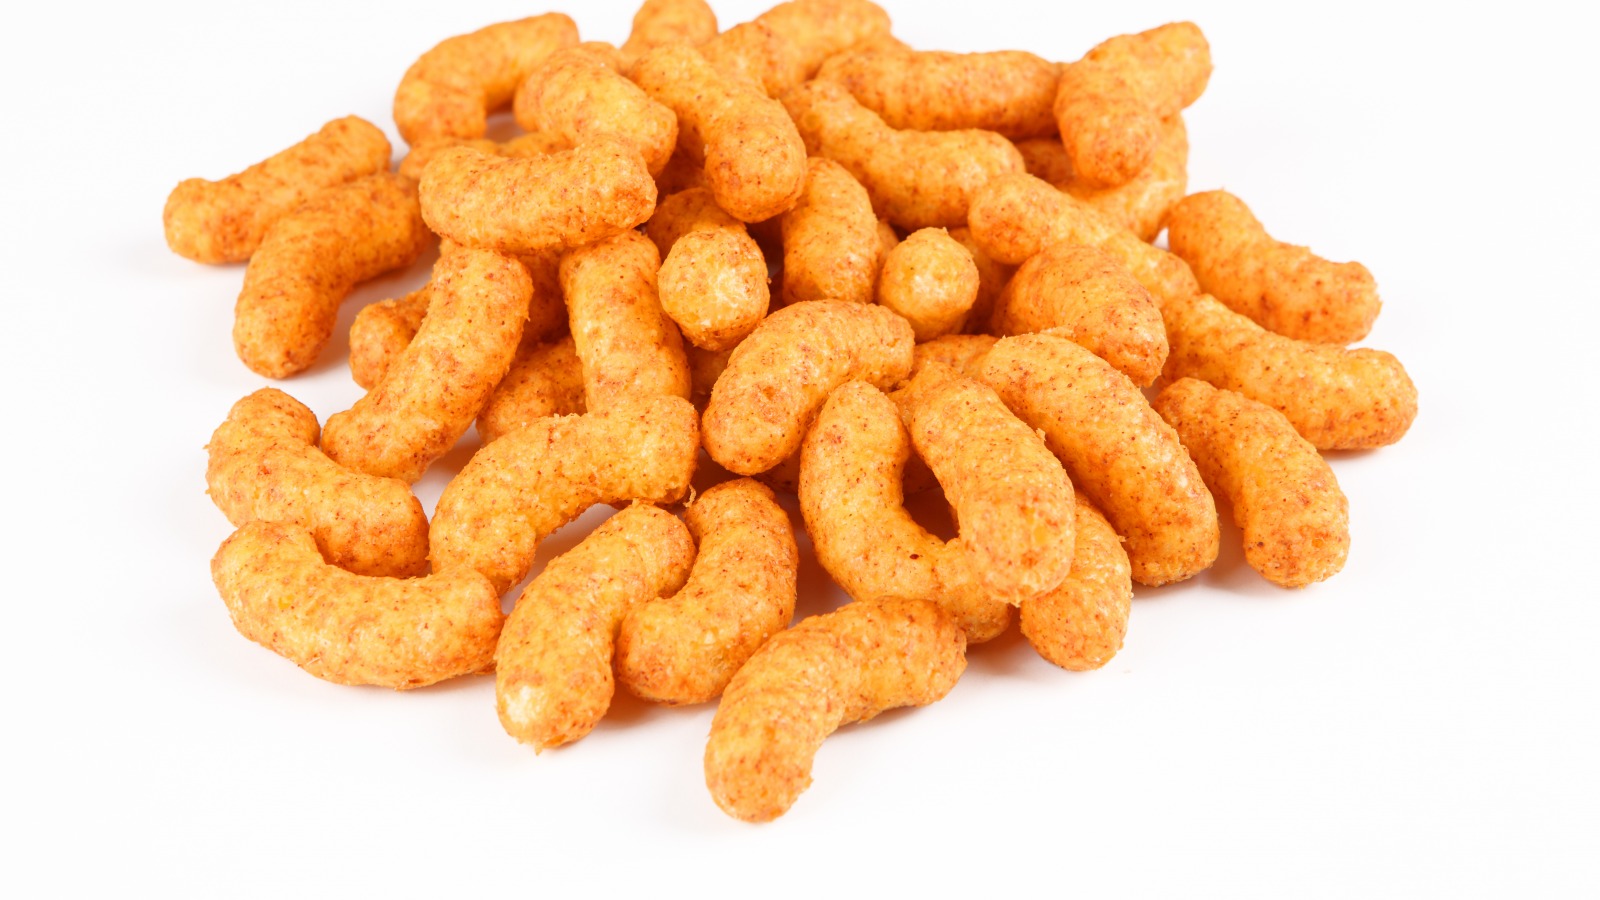 https://www.mashed.com/img/gallery/you-might-not-know-the-real-name-of-cheetos-cheesy-dust/l-intro-1601425898.jpg